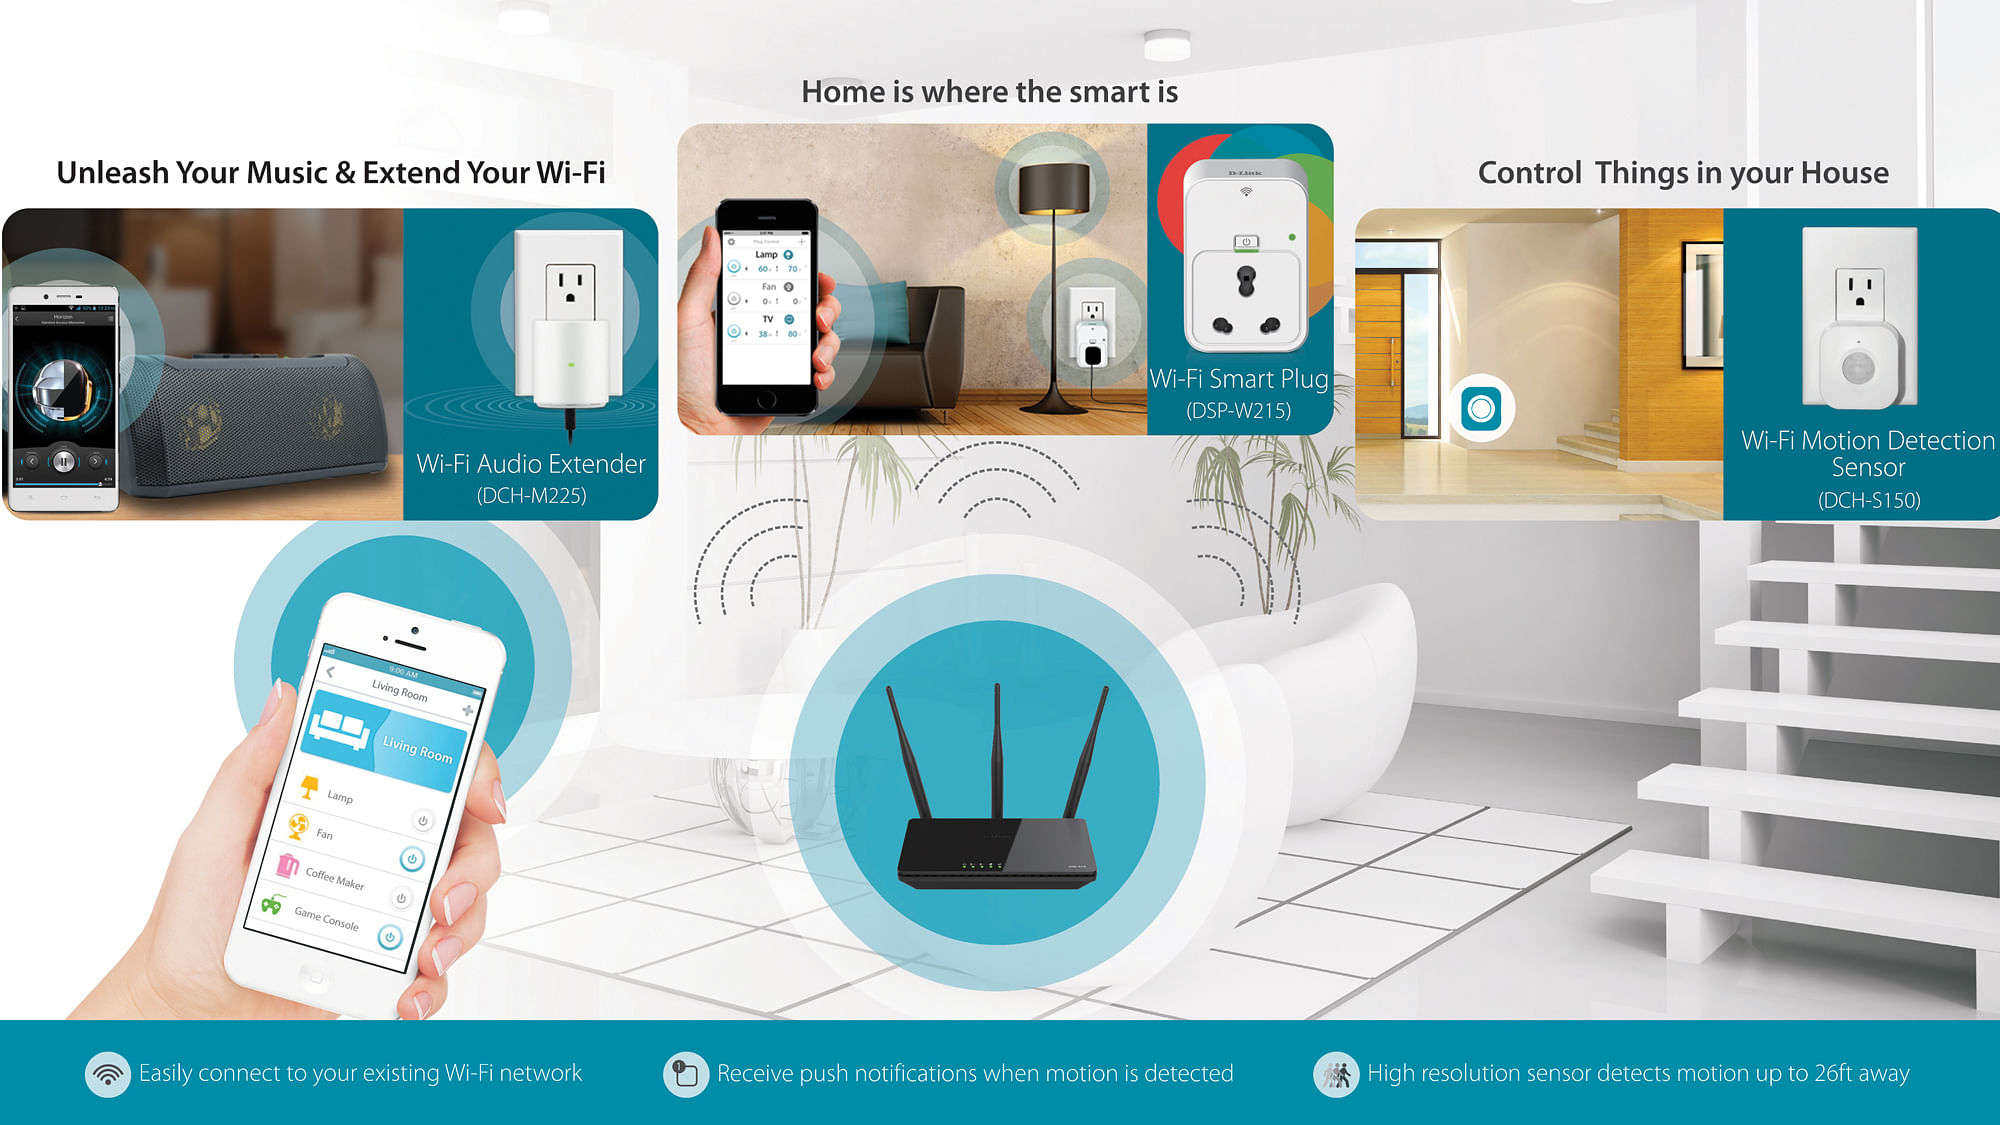 D-Link’s Internet Of Things Product Range. (Photo: D-Link)